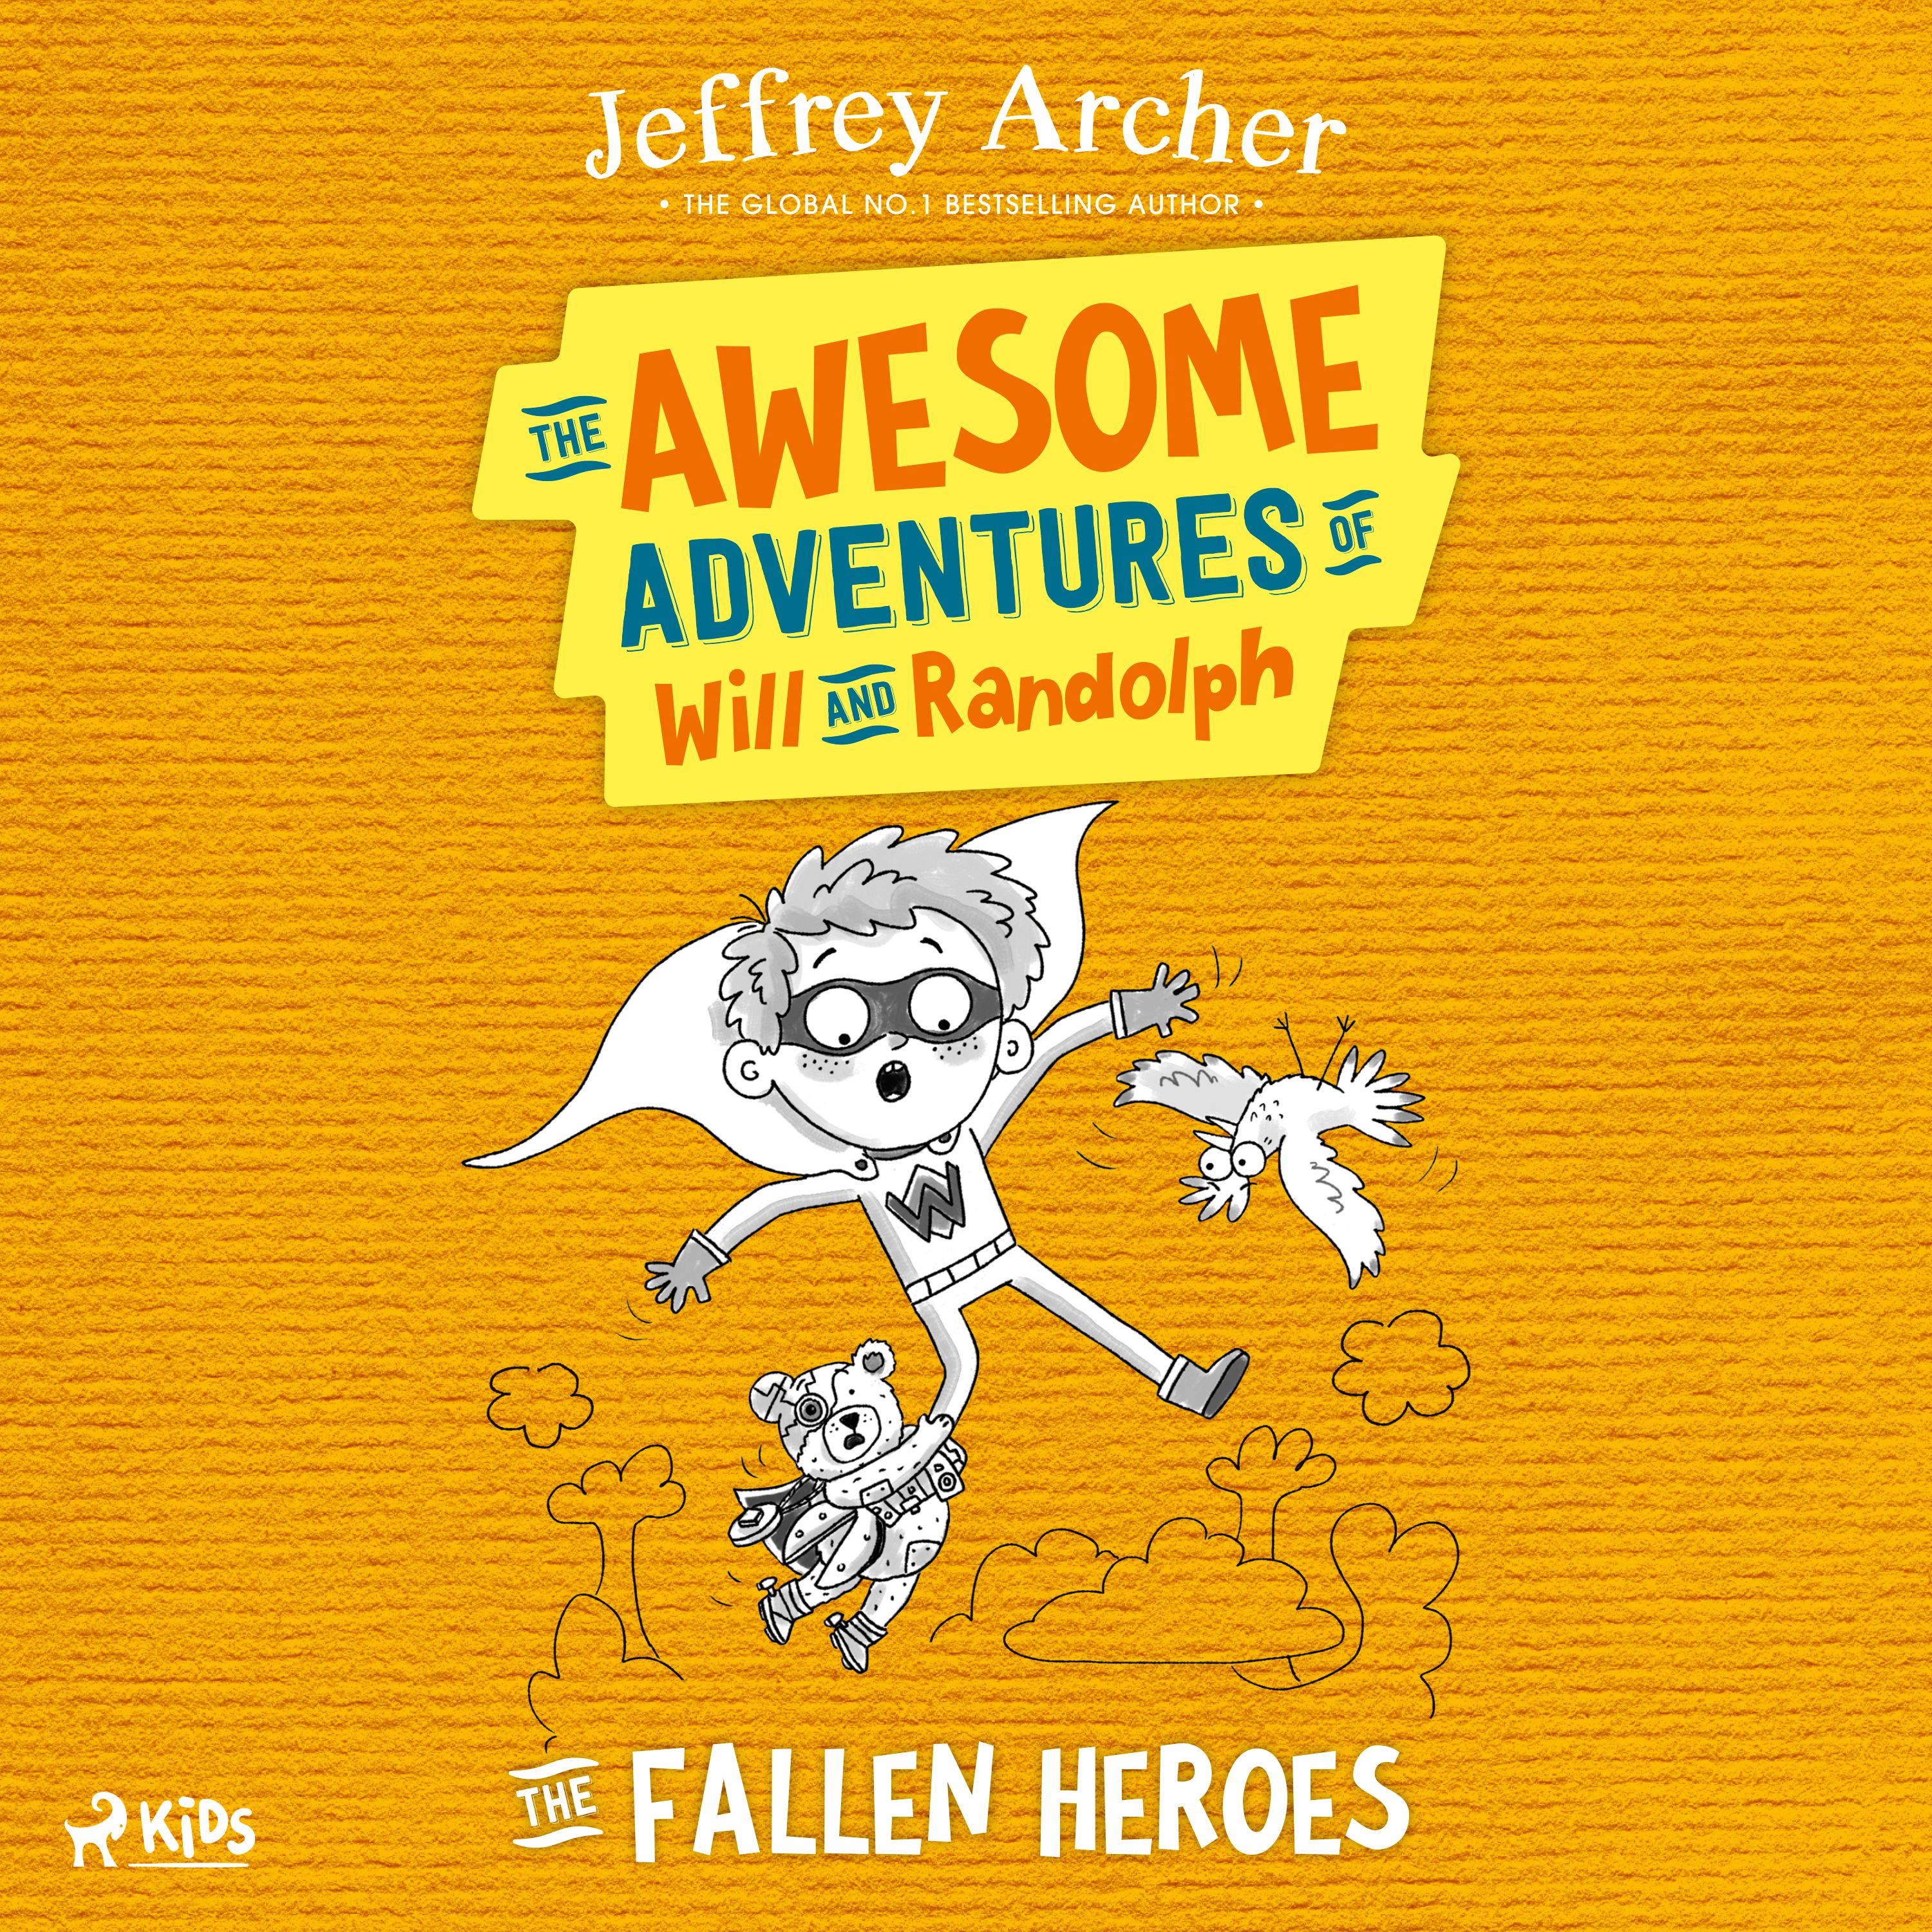 The Awesome Adventures of Will and Randolph: The Fallen Heroes, lydbog af Jeffrey Archer